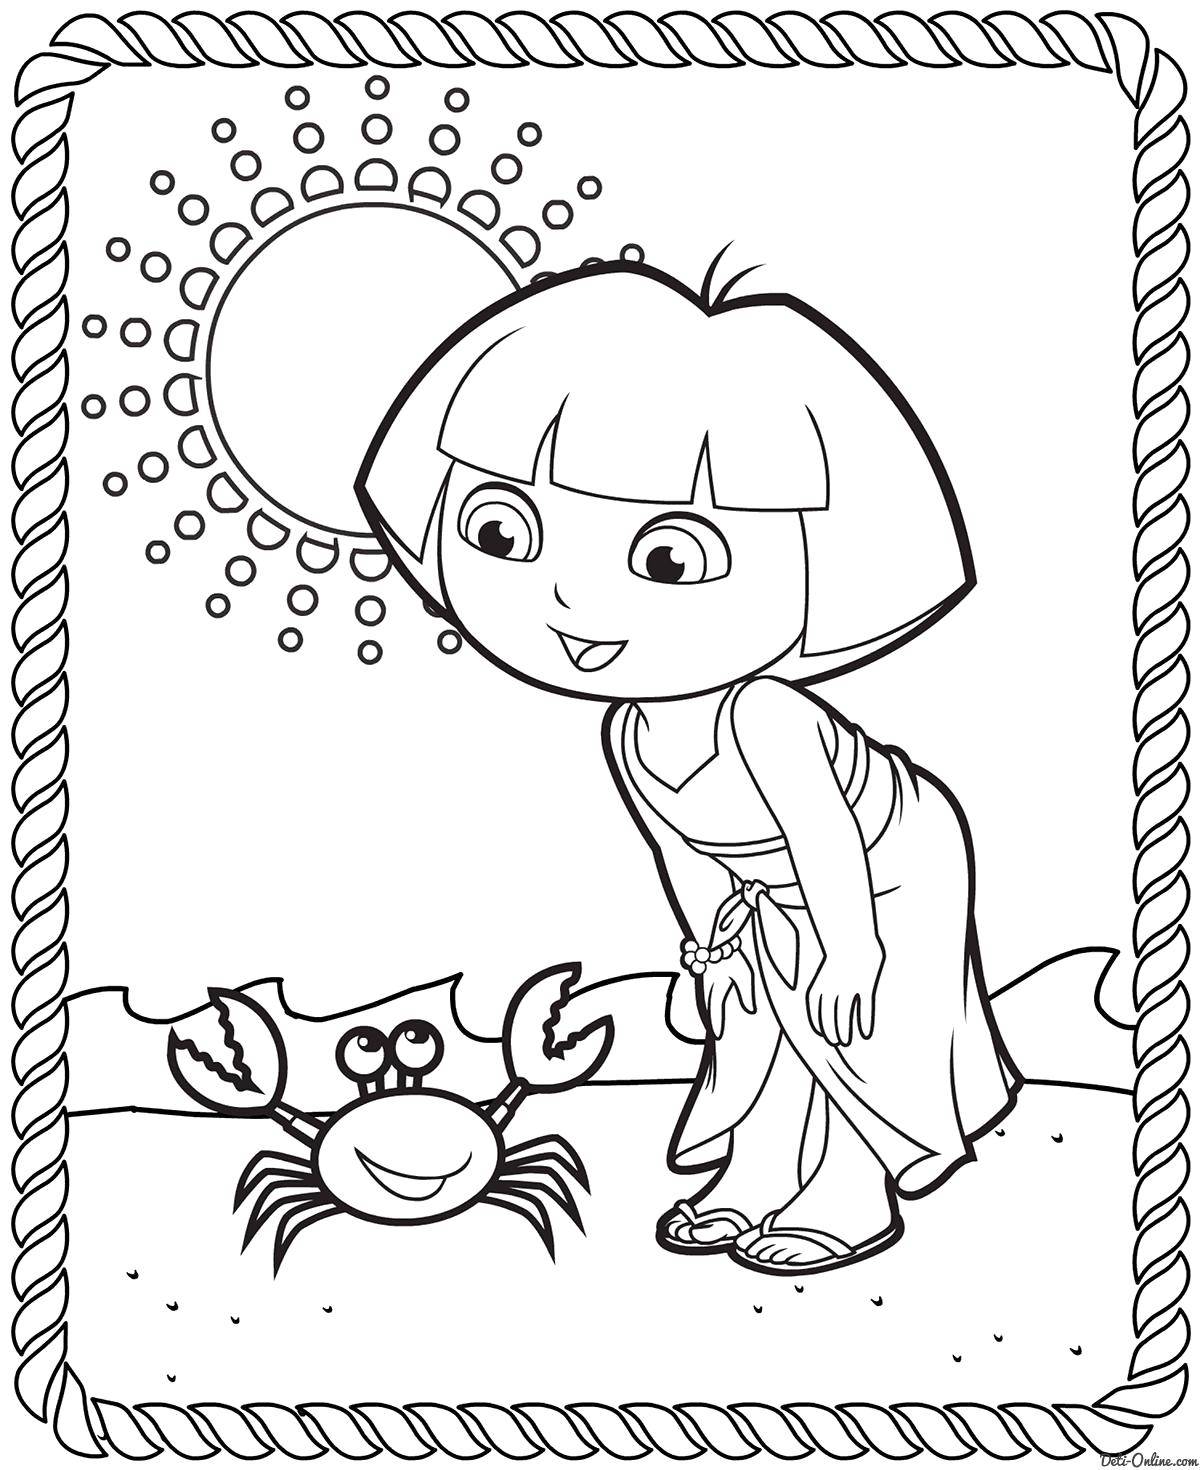 Coloring Dasha and crab. Category crab. Tags:  Underwater, crab.